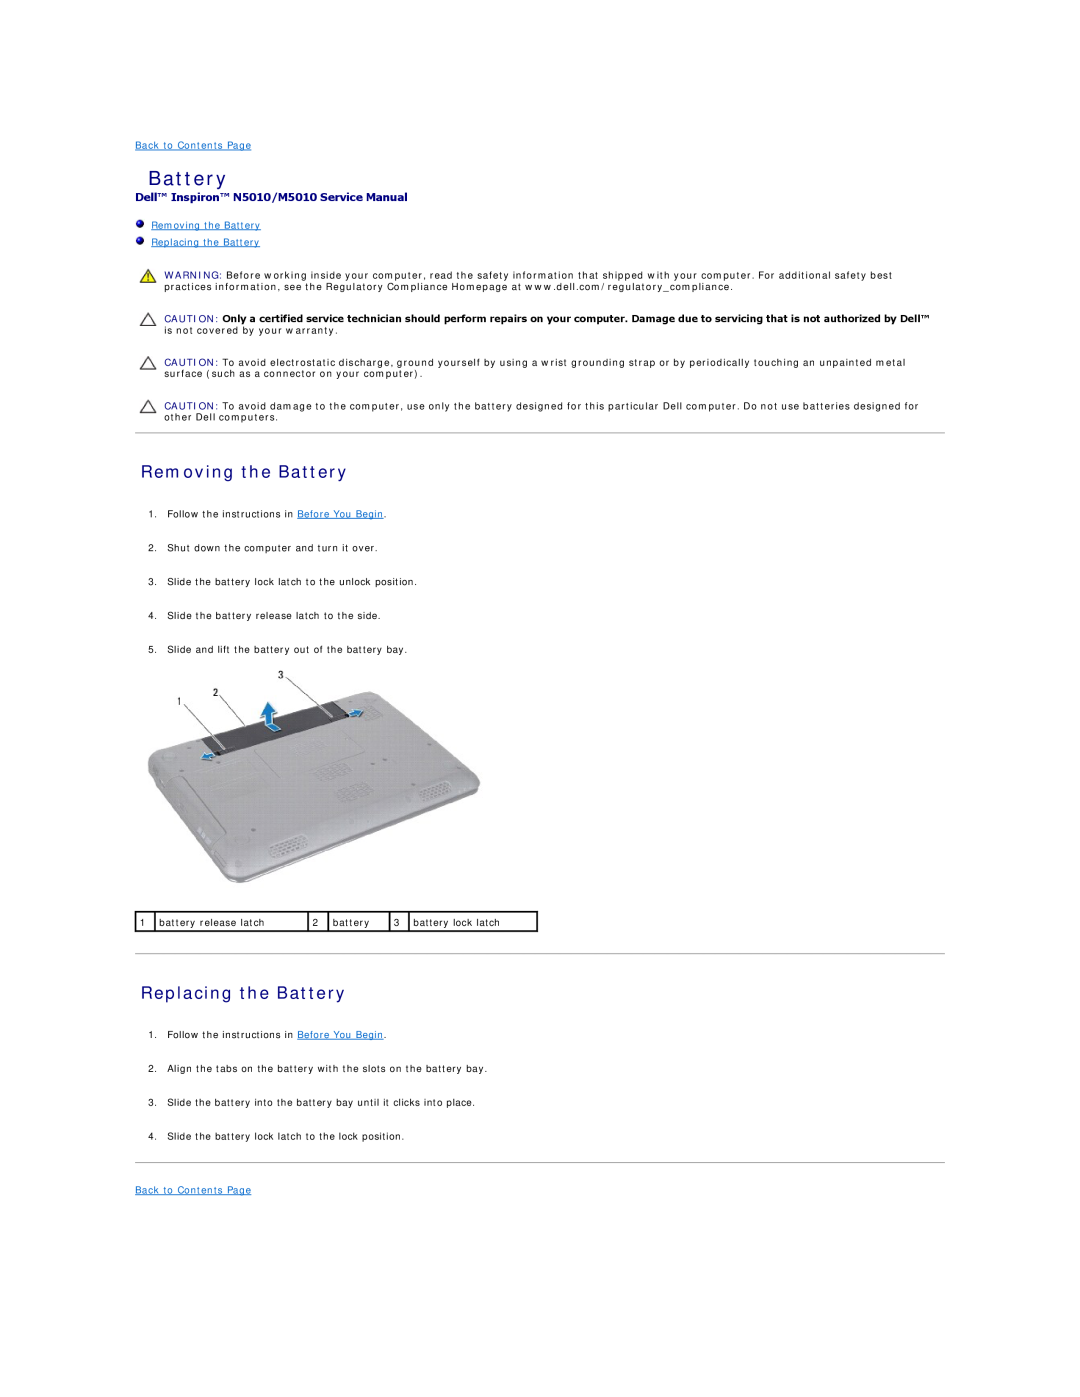 Dell manual Removing the Battery Replacing the Battery, Dell Inspiron N5010/M5010 Service Manual 